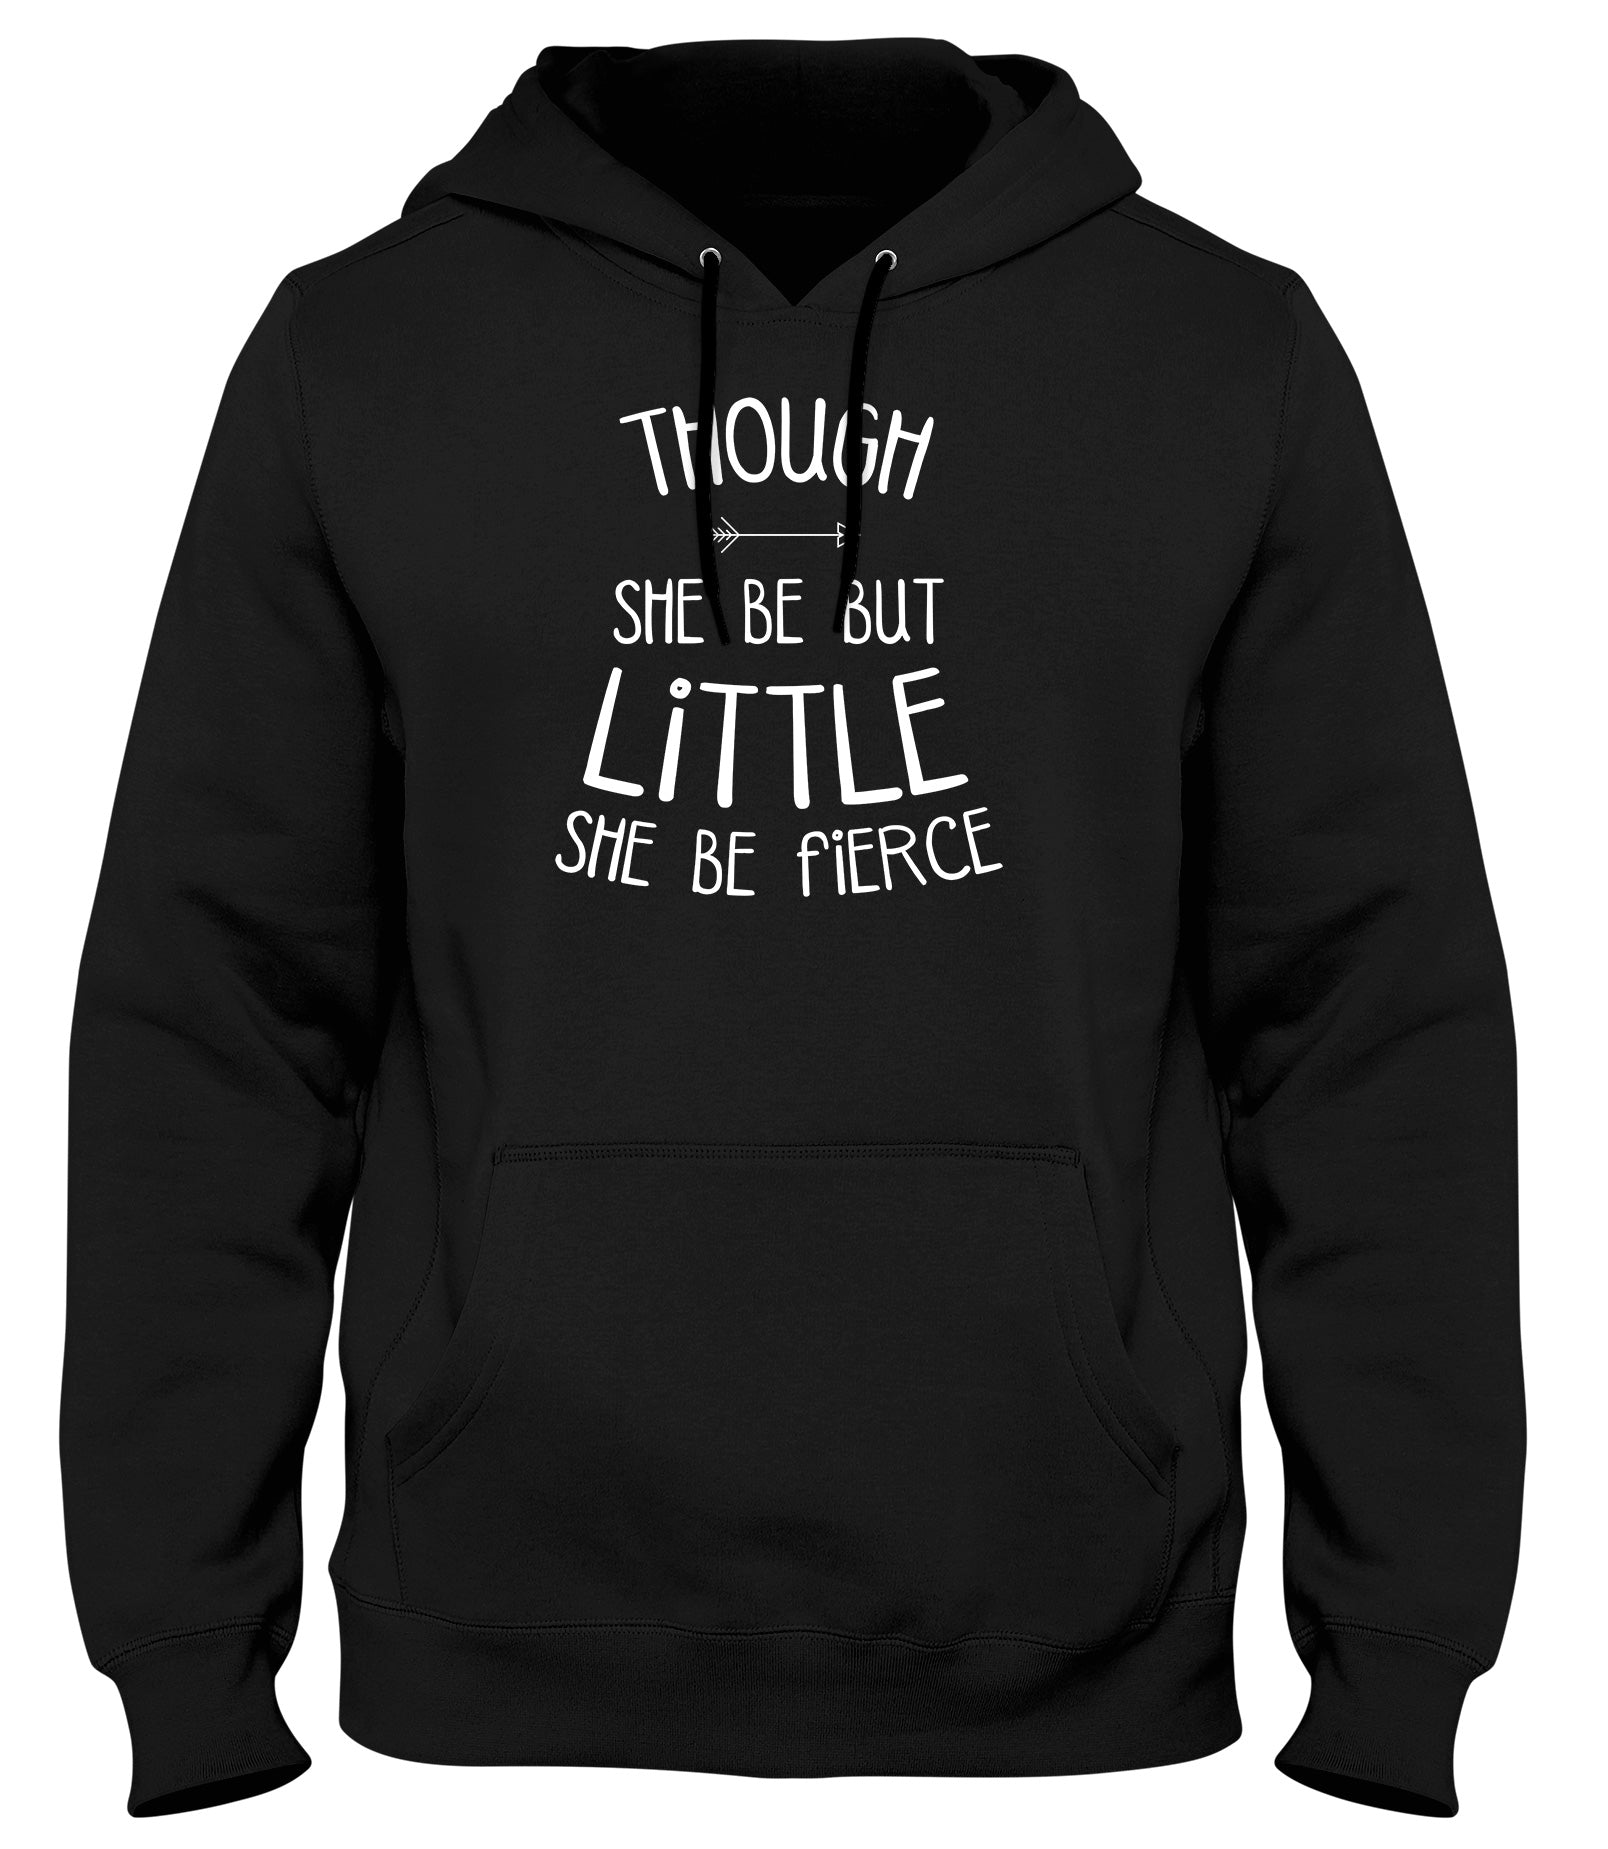 THOUGH SHE BE LITTLE SHE BE FIERCE MENS LADIES WOMENS UNISEX HOODIE